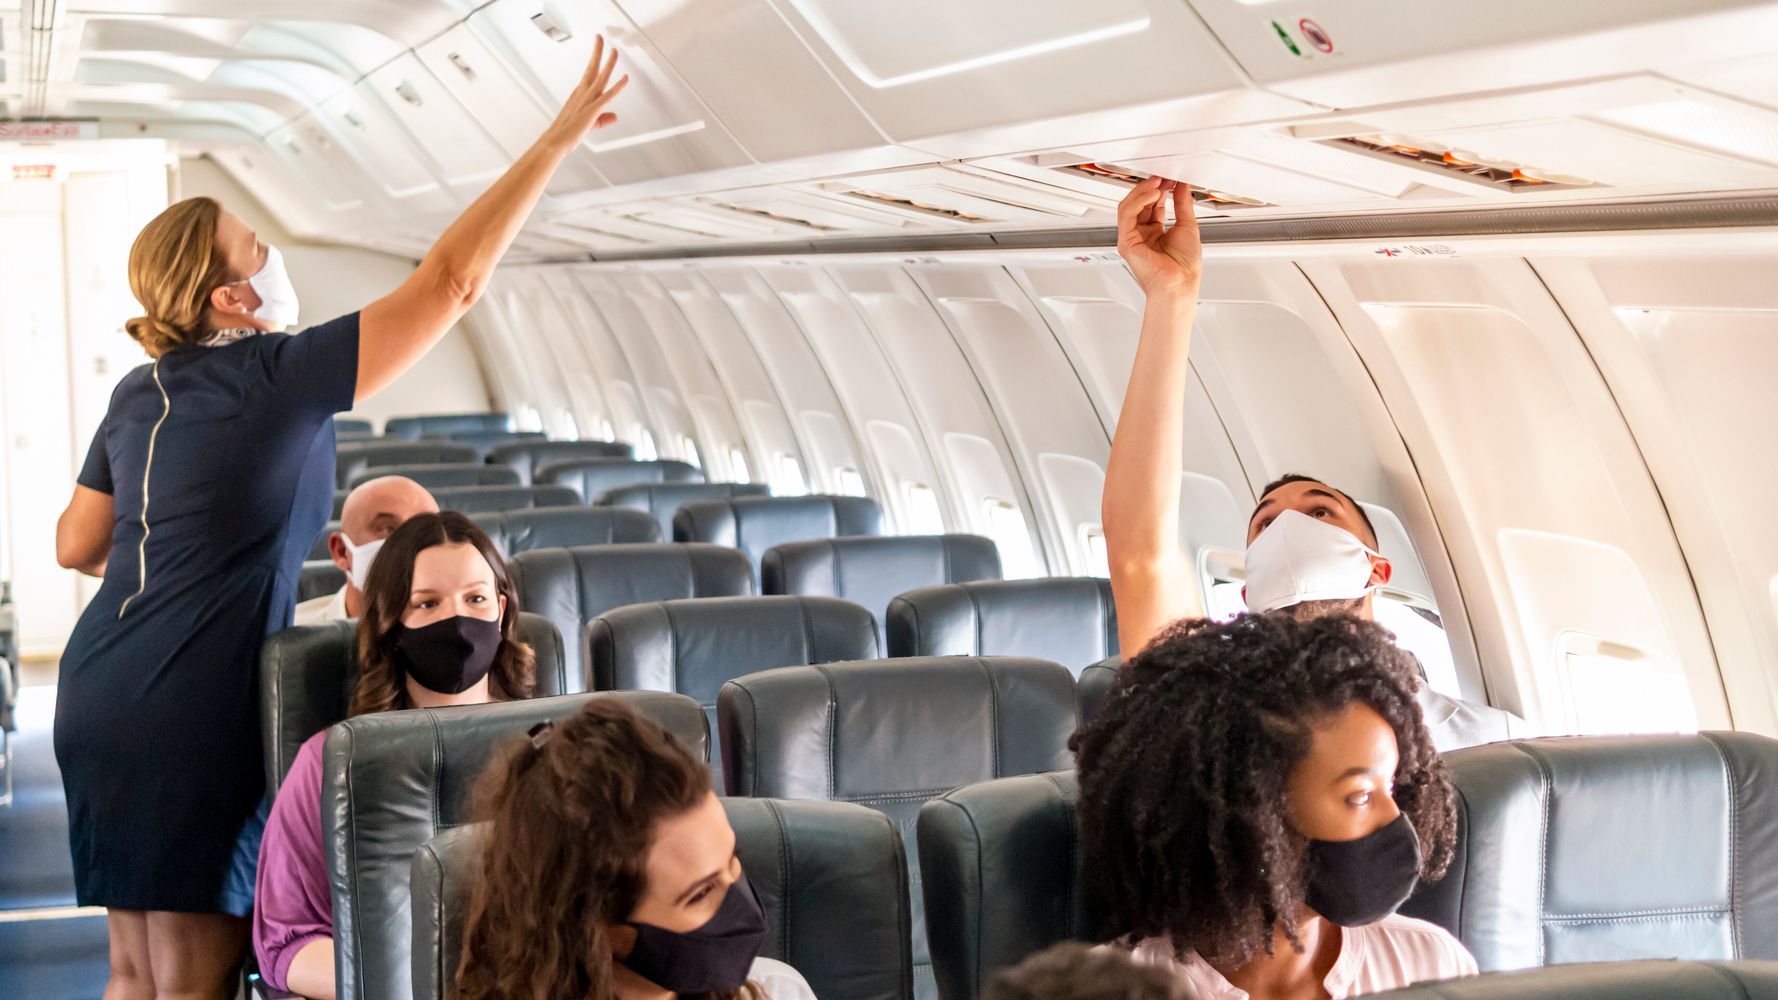 Flight Attendant Abuse Is Escalating. Here’s How Passengers Can Help.